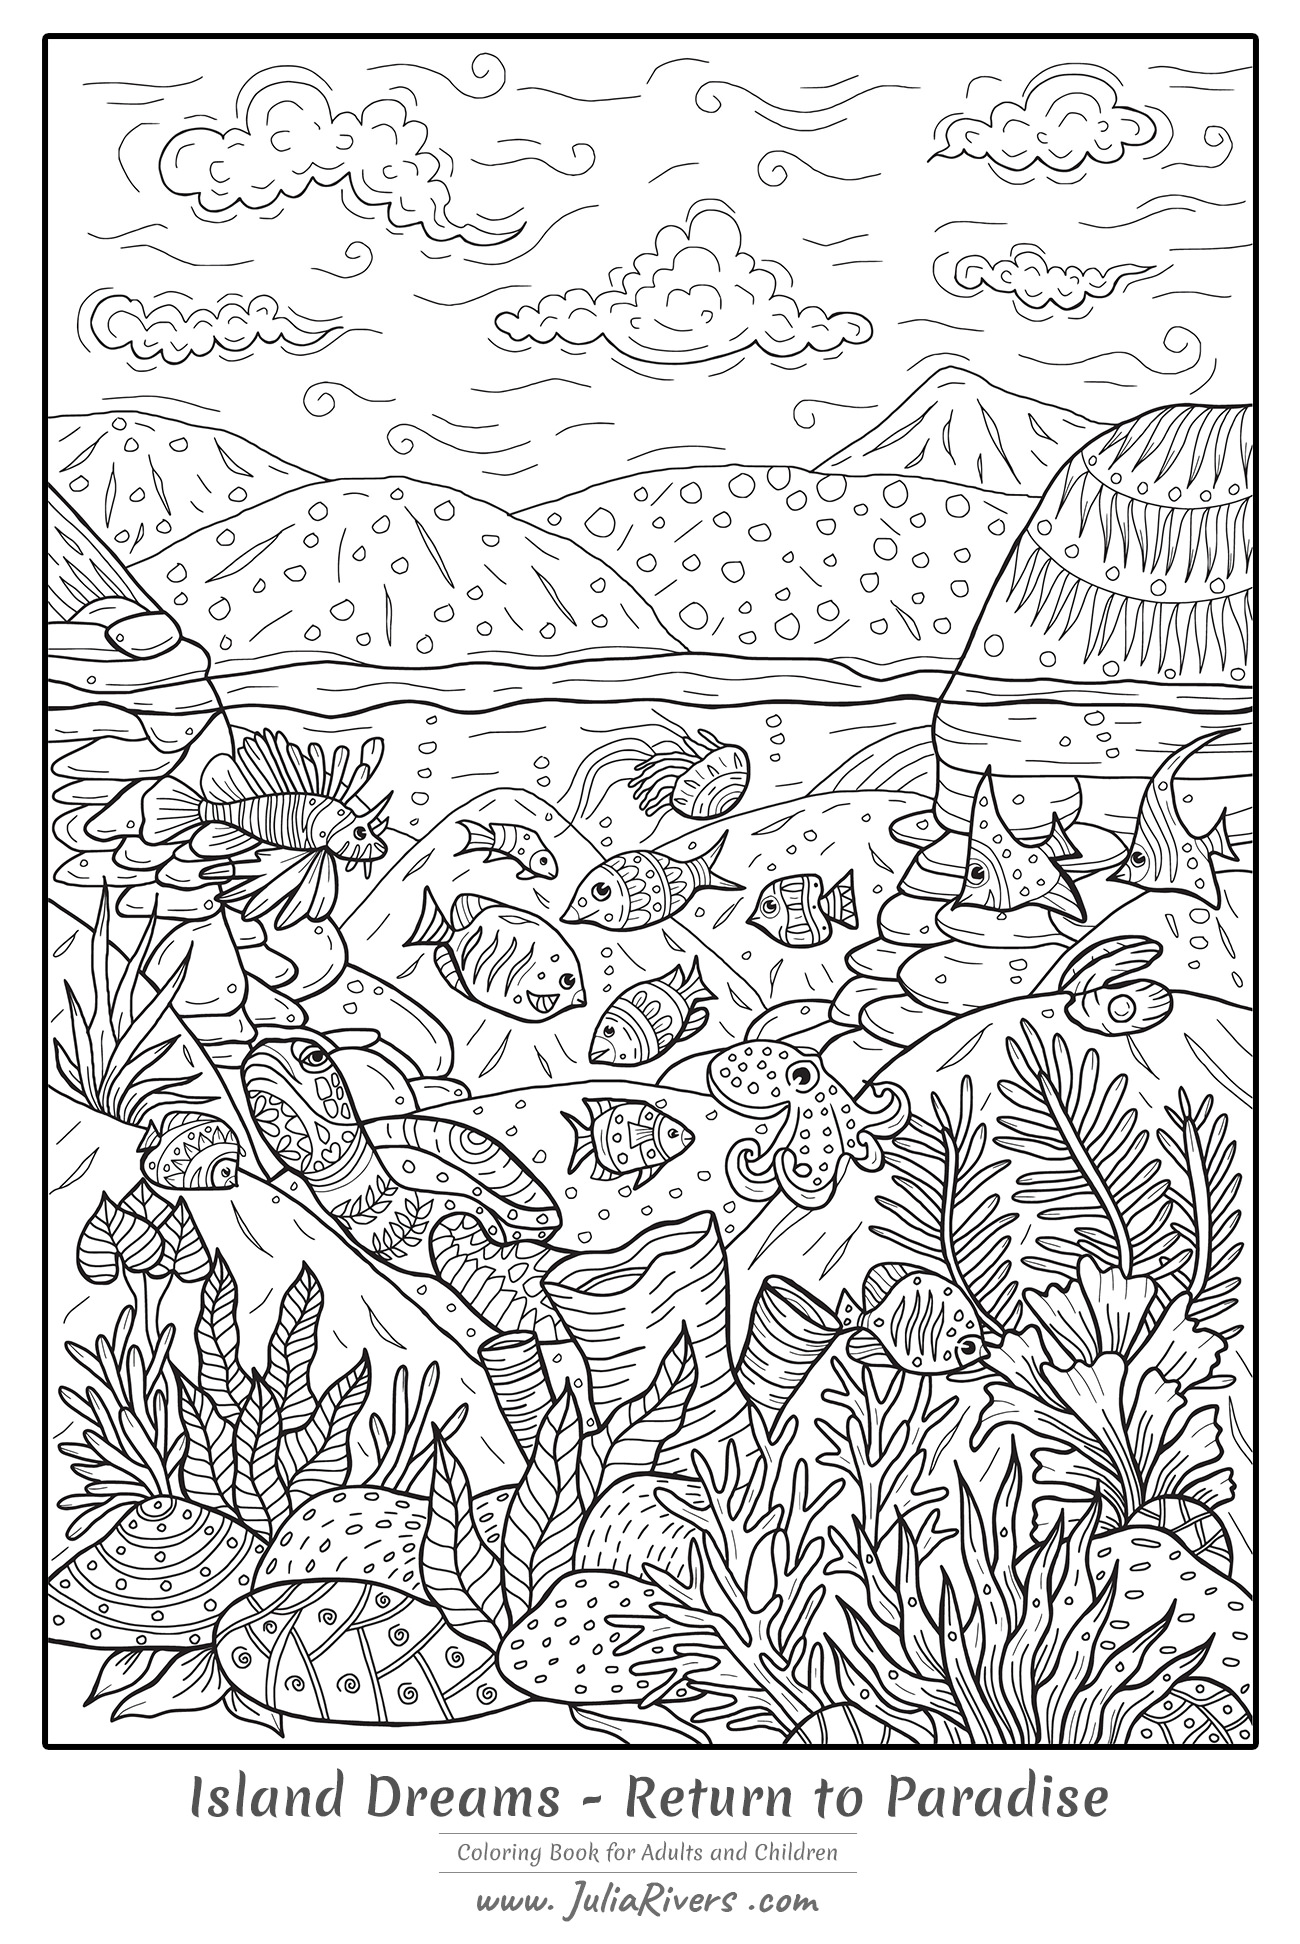 'Island Dreams : Return to Paradise' : Coloring page full of aquatic creatures and plant species ... and a beautiful landscape in background, Artist : Julia Rivers